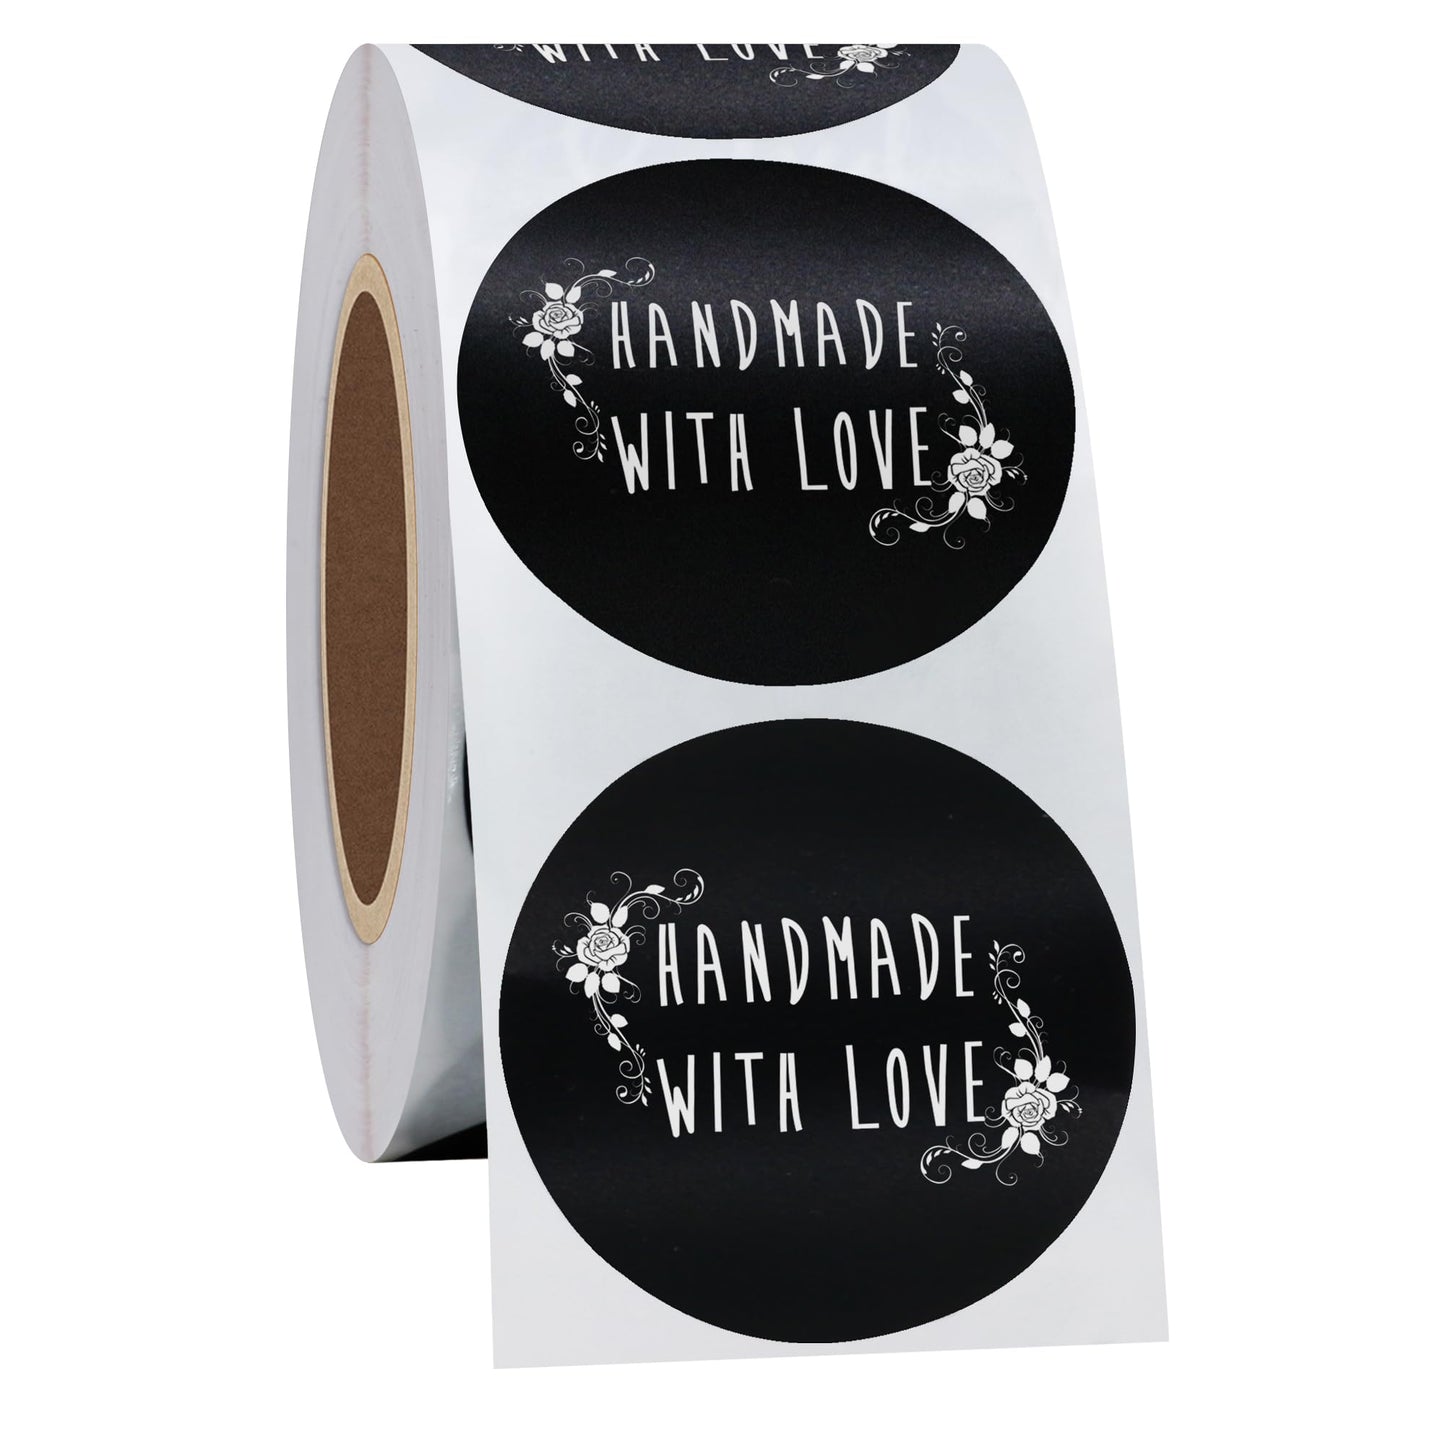 Hybsk 1.5" Inch Rose Floral Round Handmade with Love Stickers with Flowers Total 500 Labels Per Roll